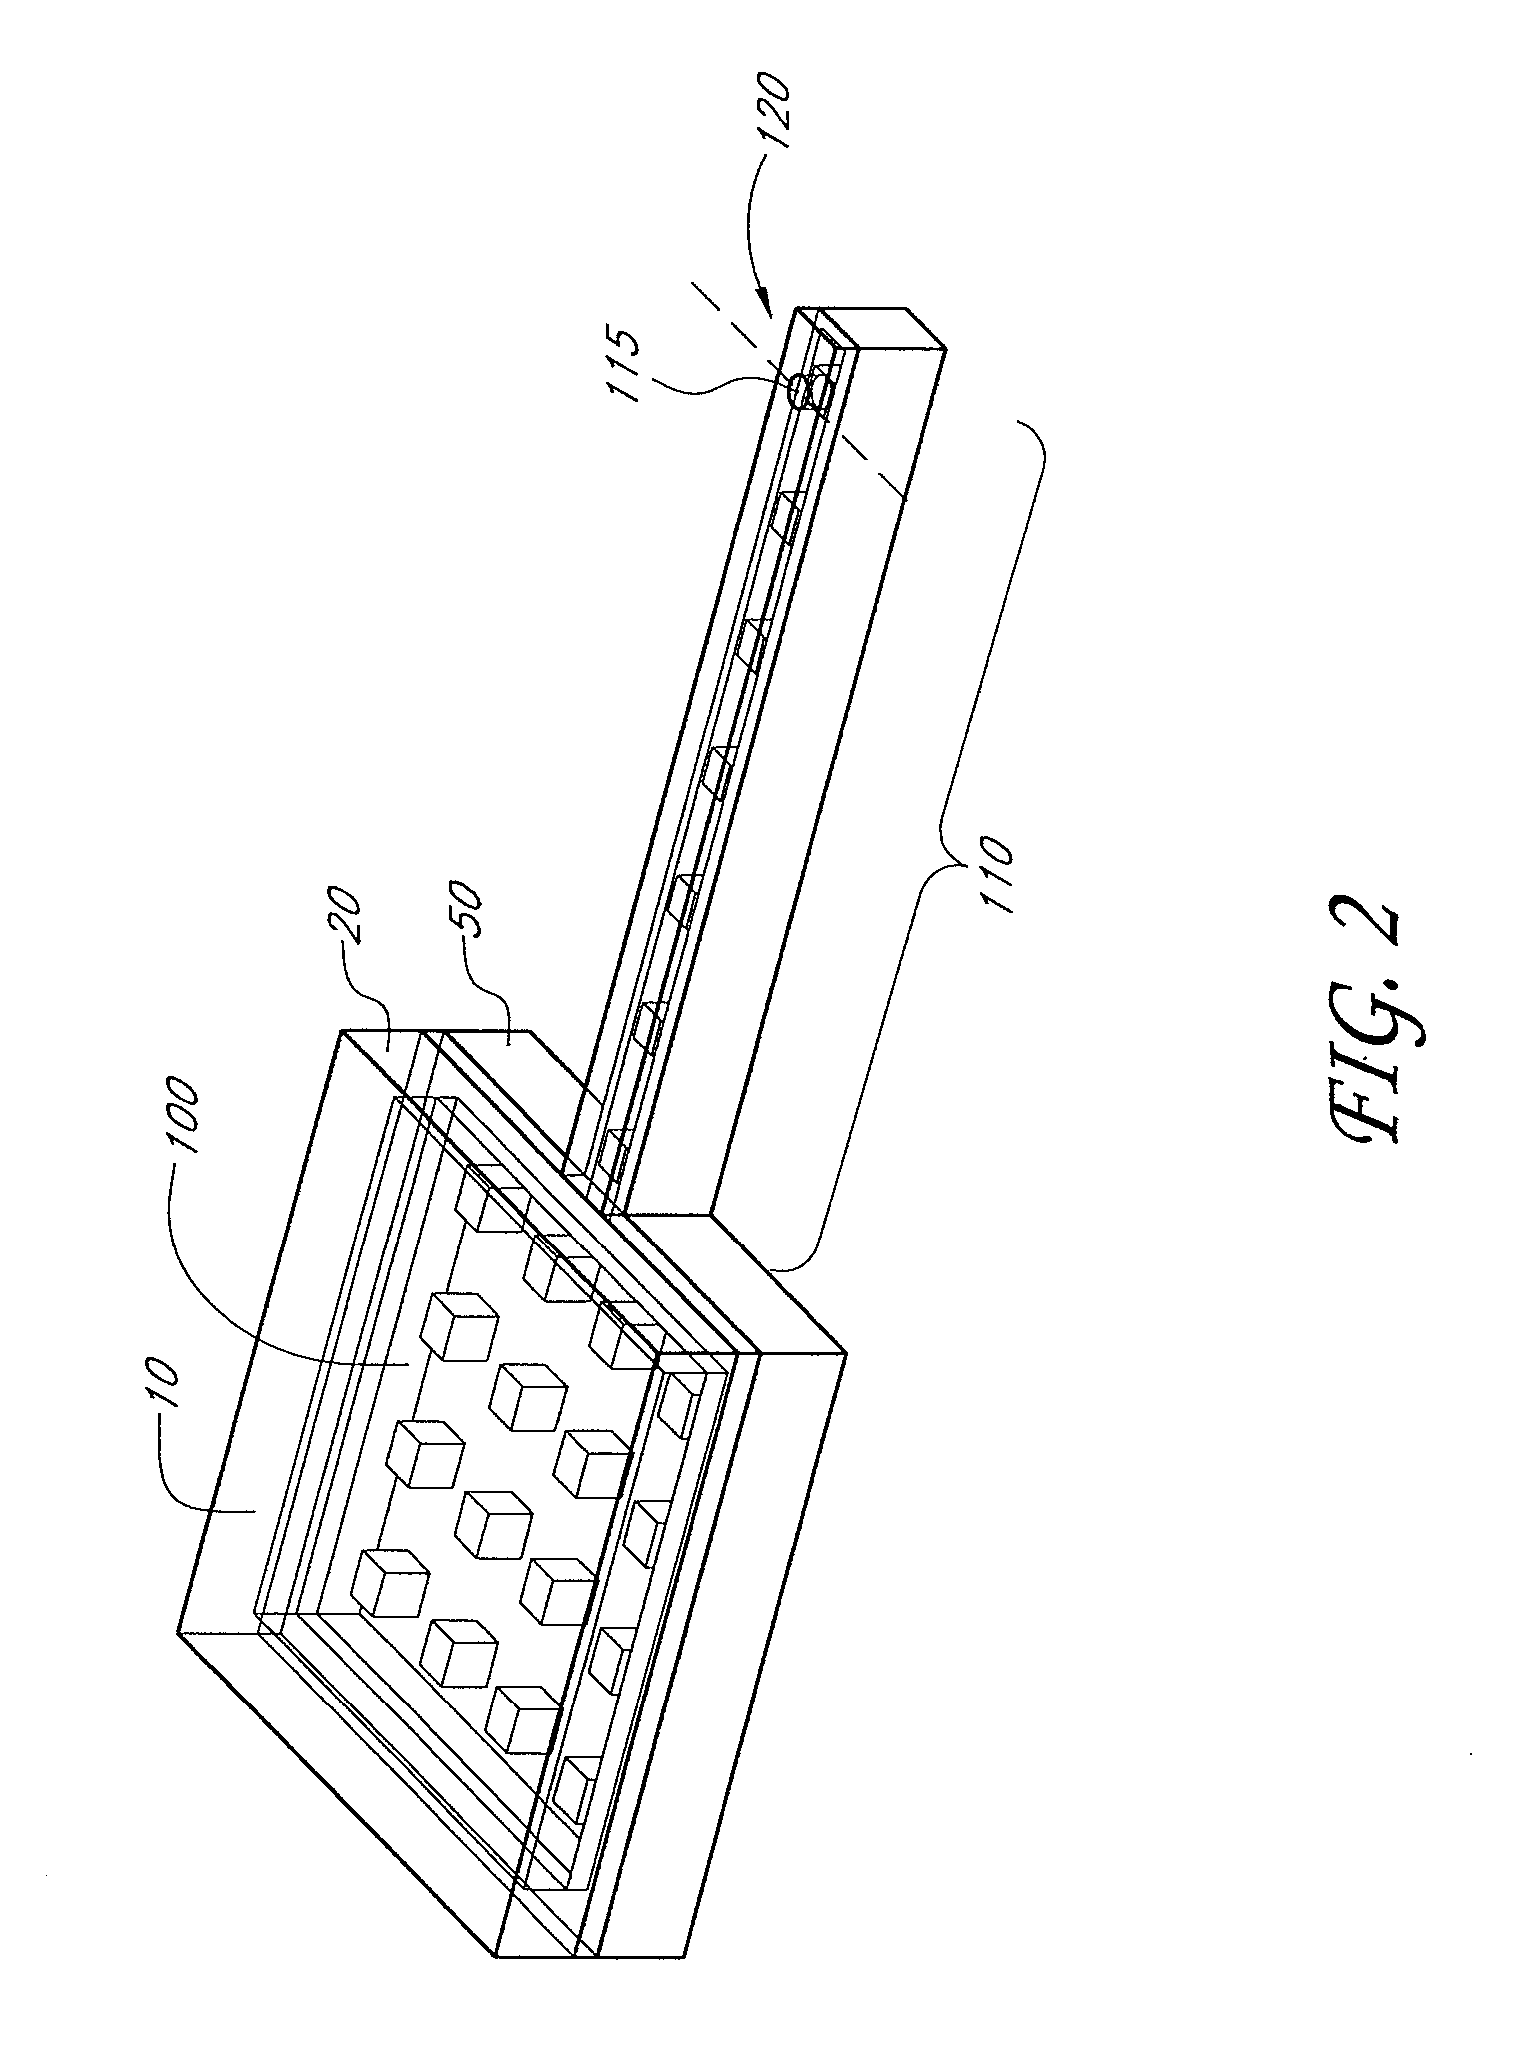 MEMS device and method for delivery of therapeutic agents